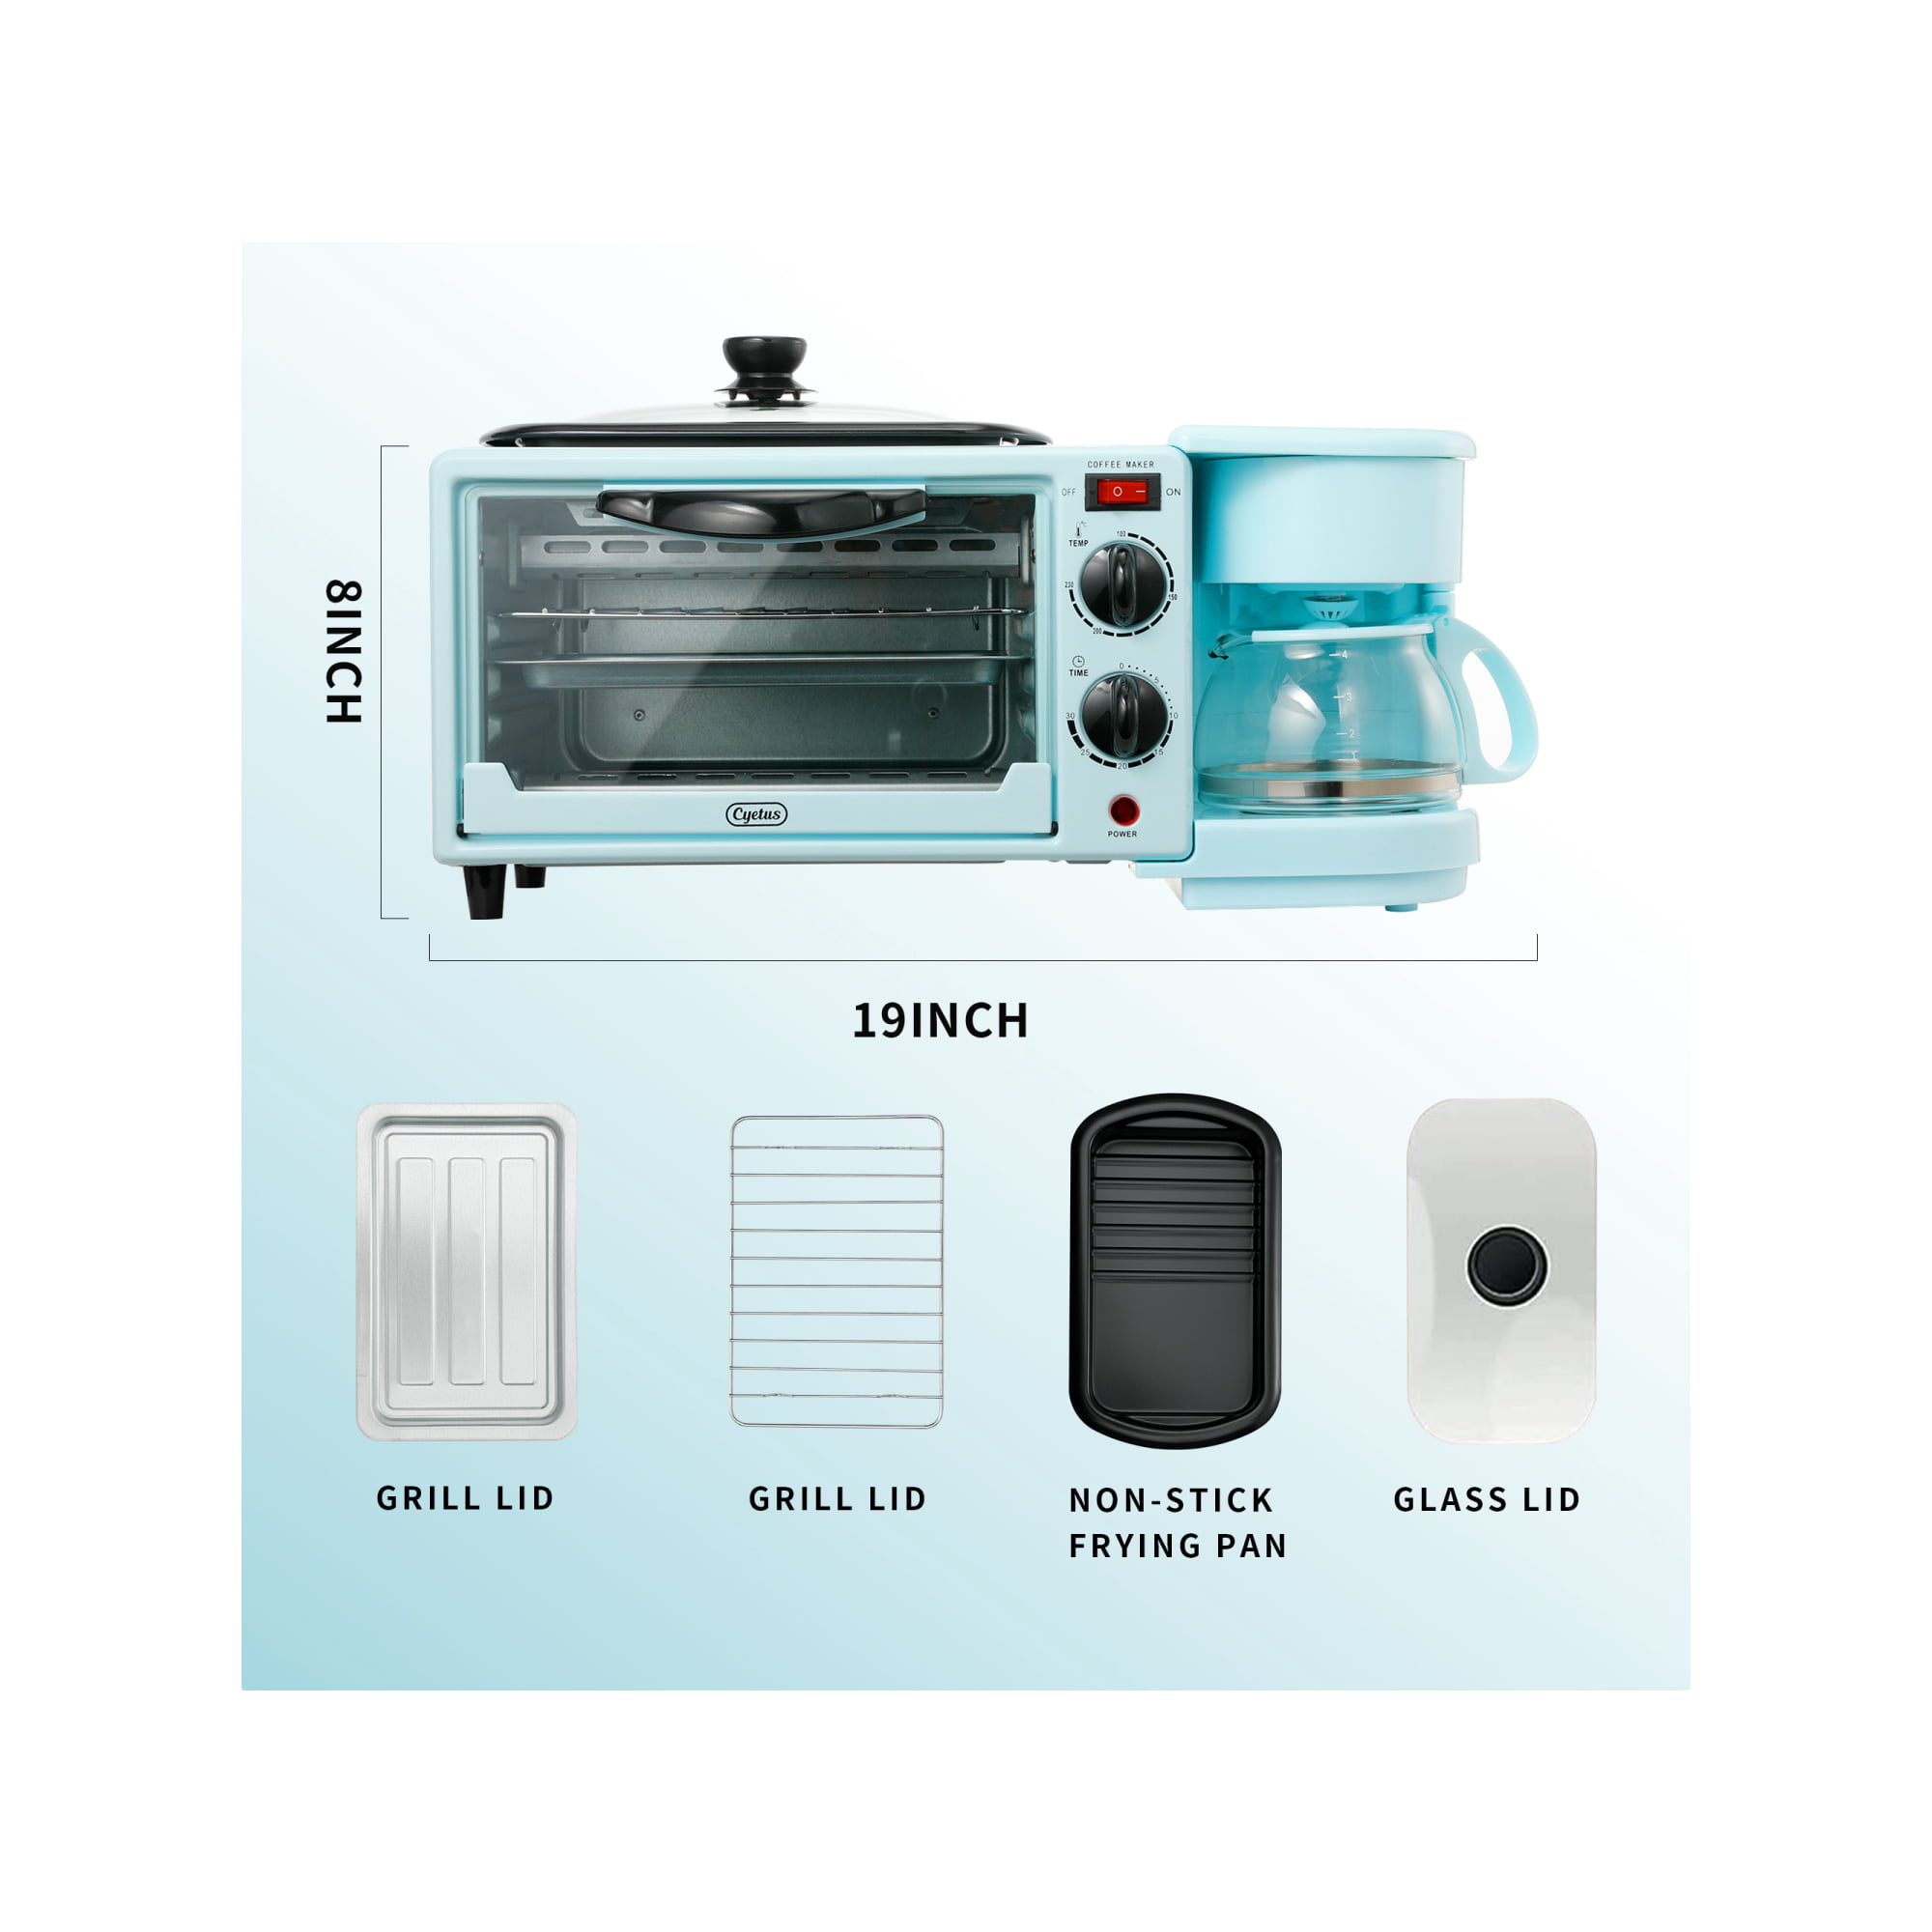 https://themarketdepot.com/wp-content/uploads/2023/01/CYETUS-3-in-1-Family-Size-Breakfast-Station-Machine-with-600ML-Drip-Coffee-Maker-Nonstick-Griddle-9L-Toaster-Oven-5.jpeg